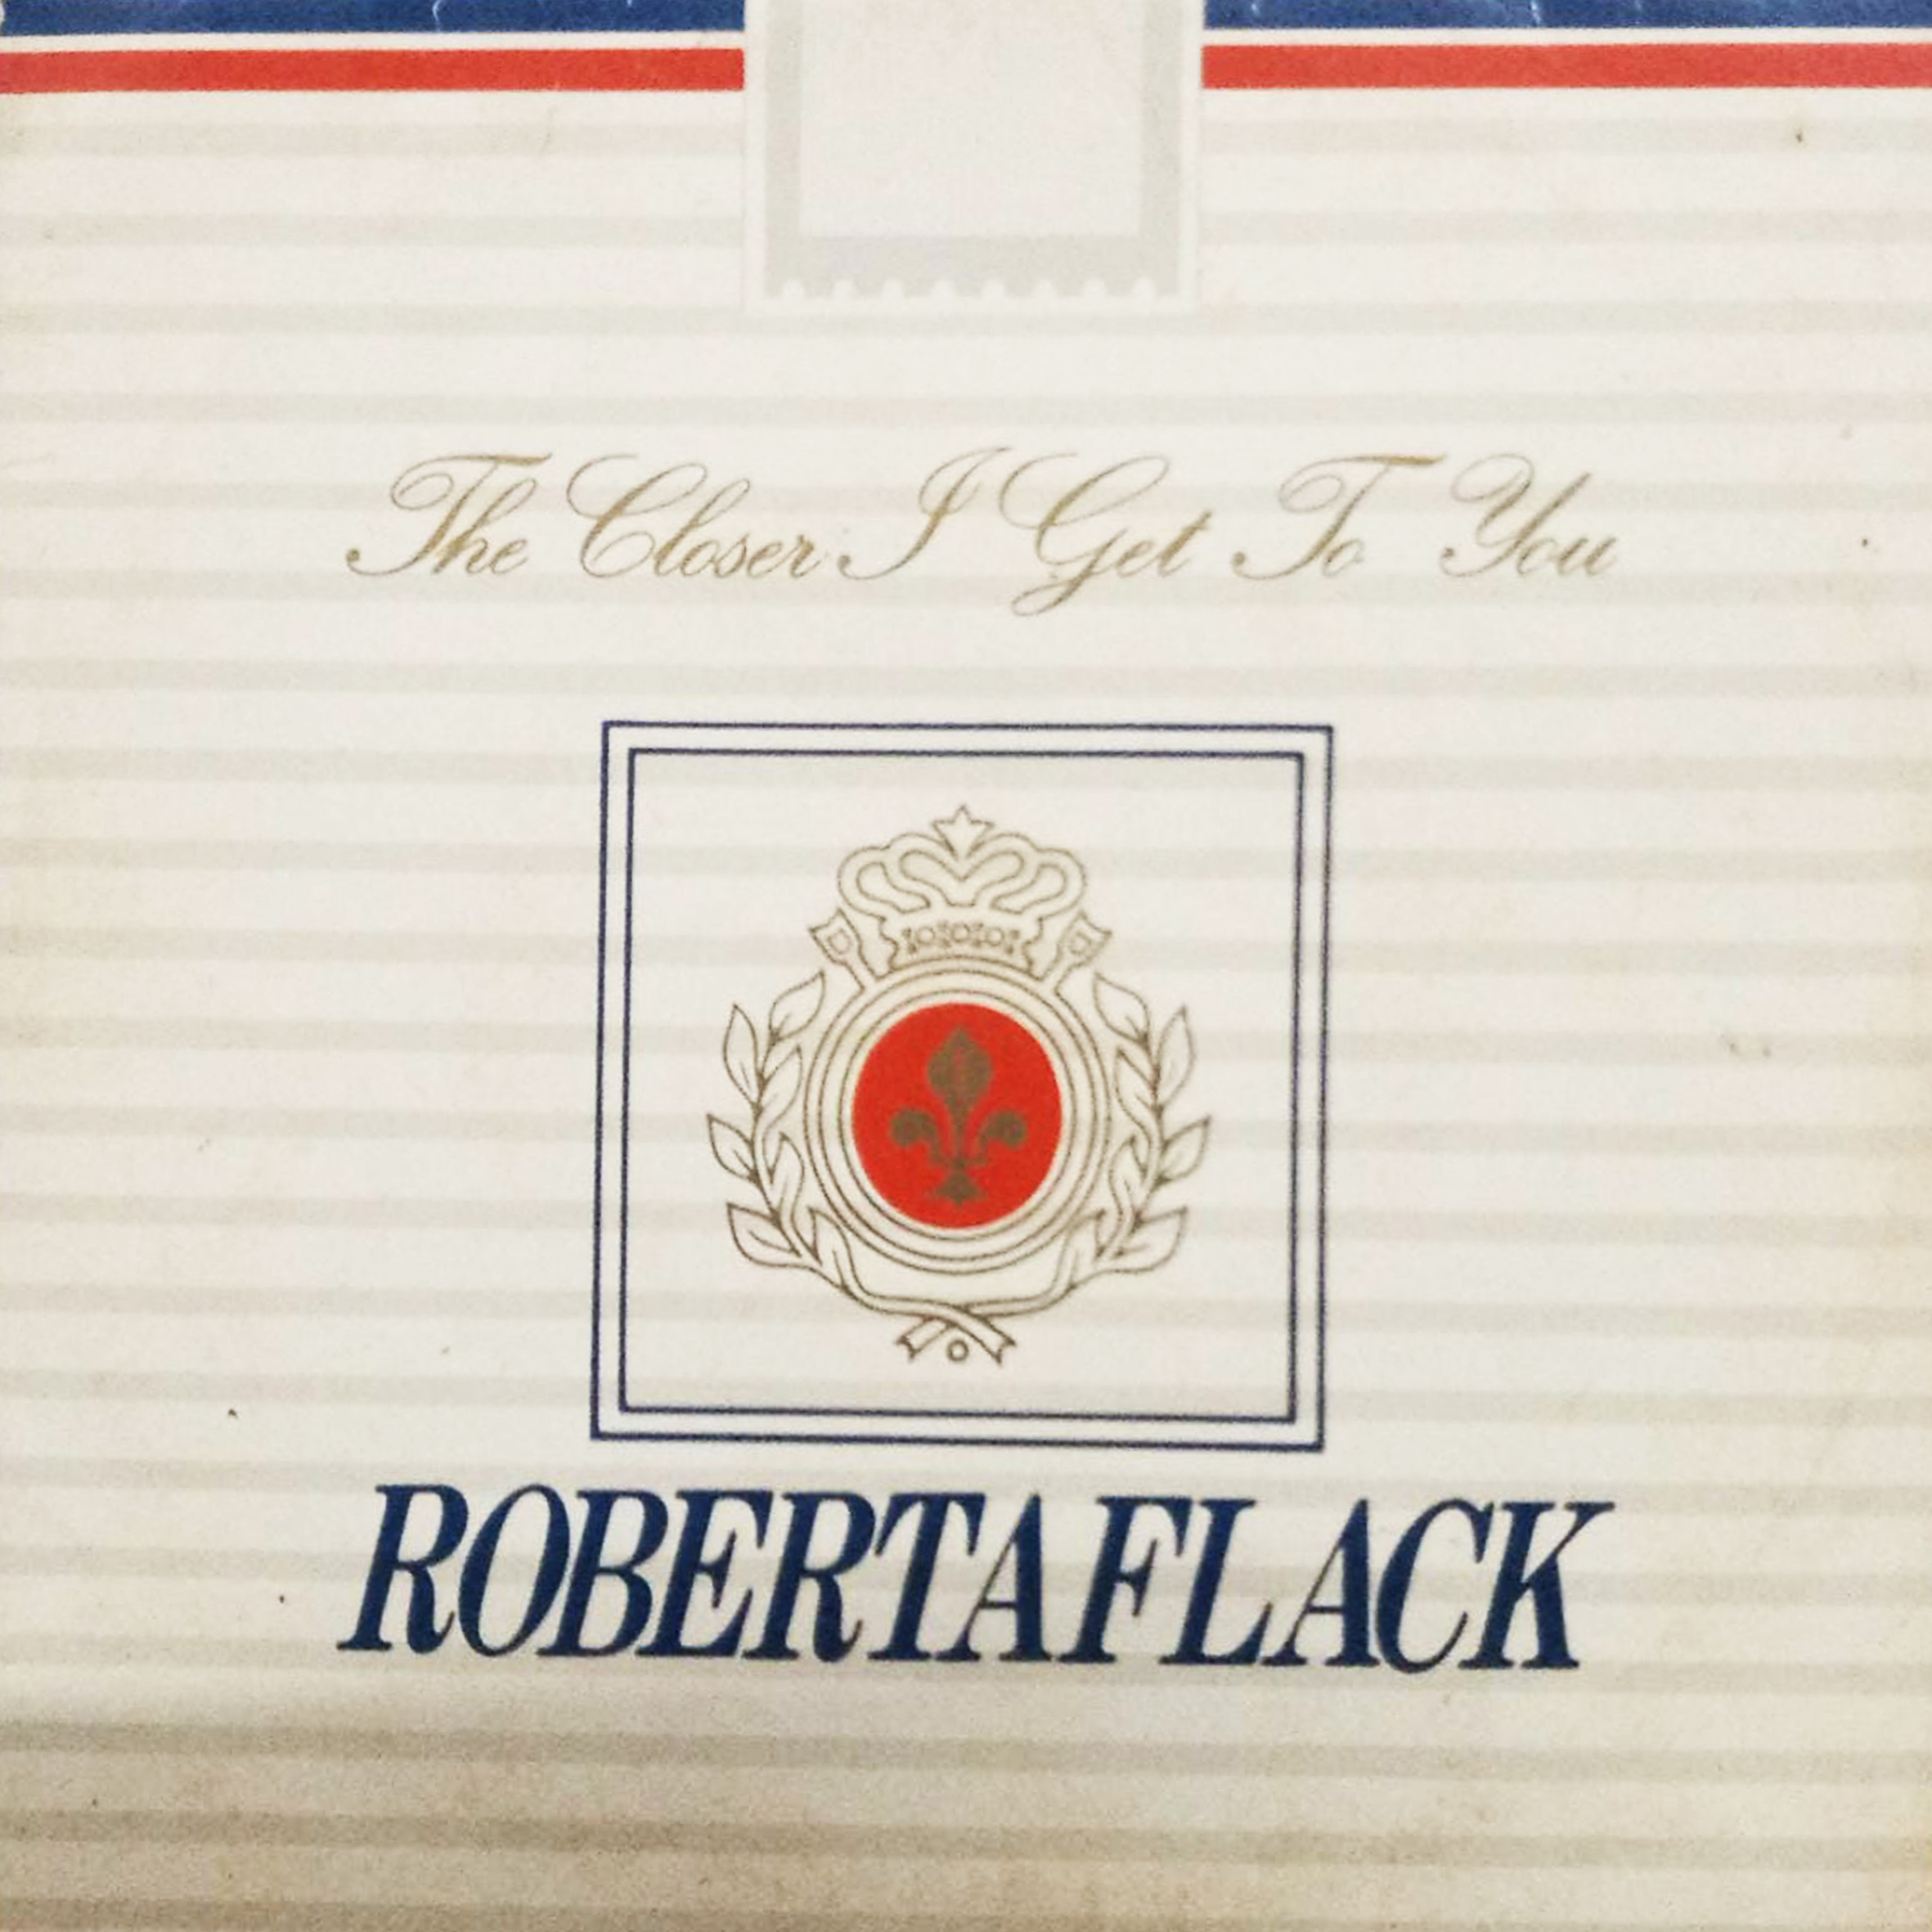 Vinil Compacto - Roberta Flack With Donny Hathaway - The Closer I Get To You